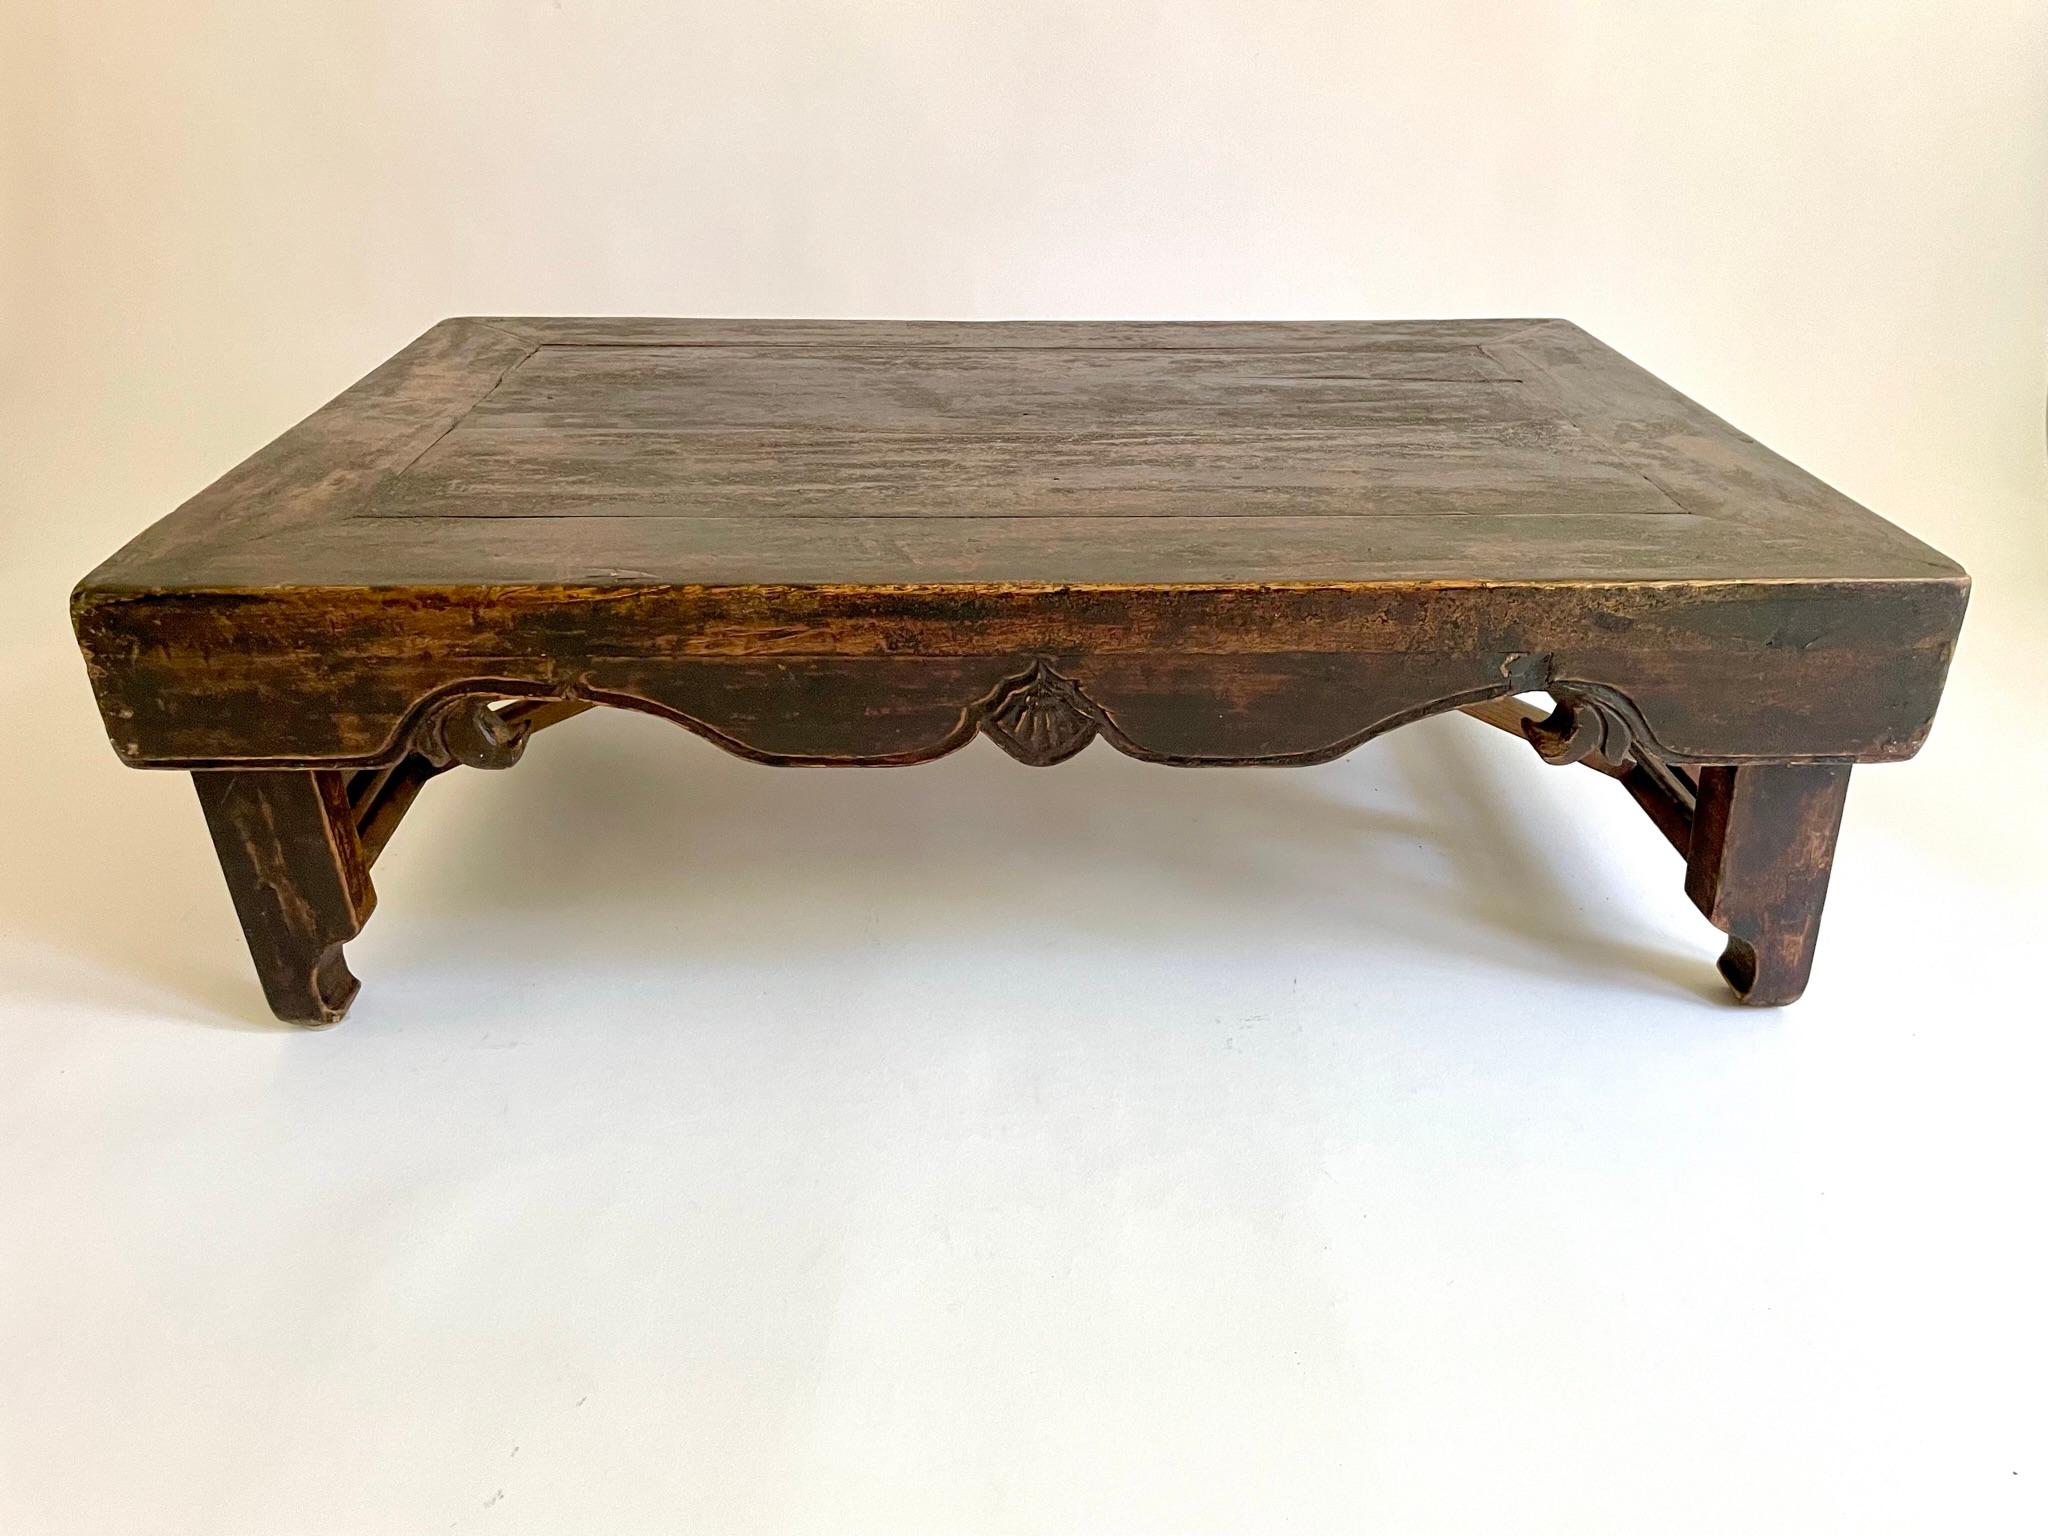 Rare 19th Century Chinese Folding Low Table 'Kang Table' For Sale 12